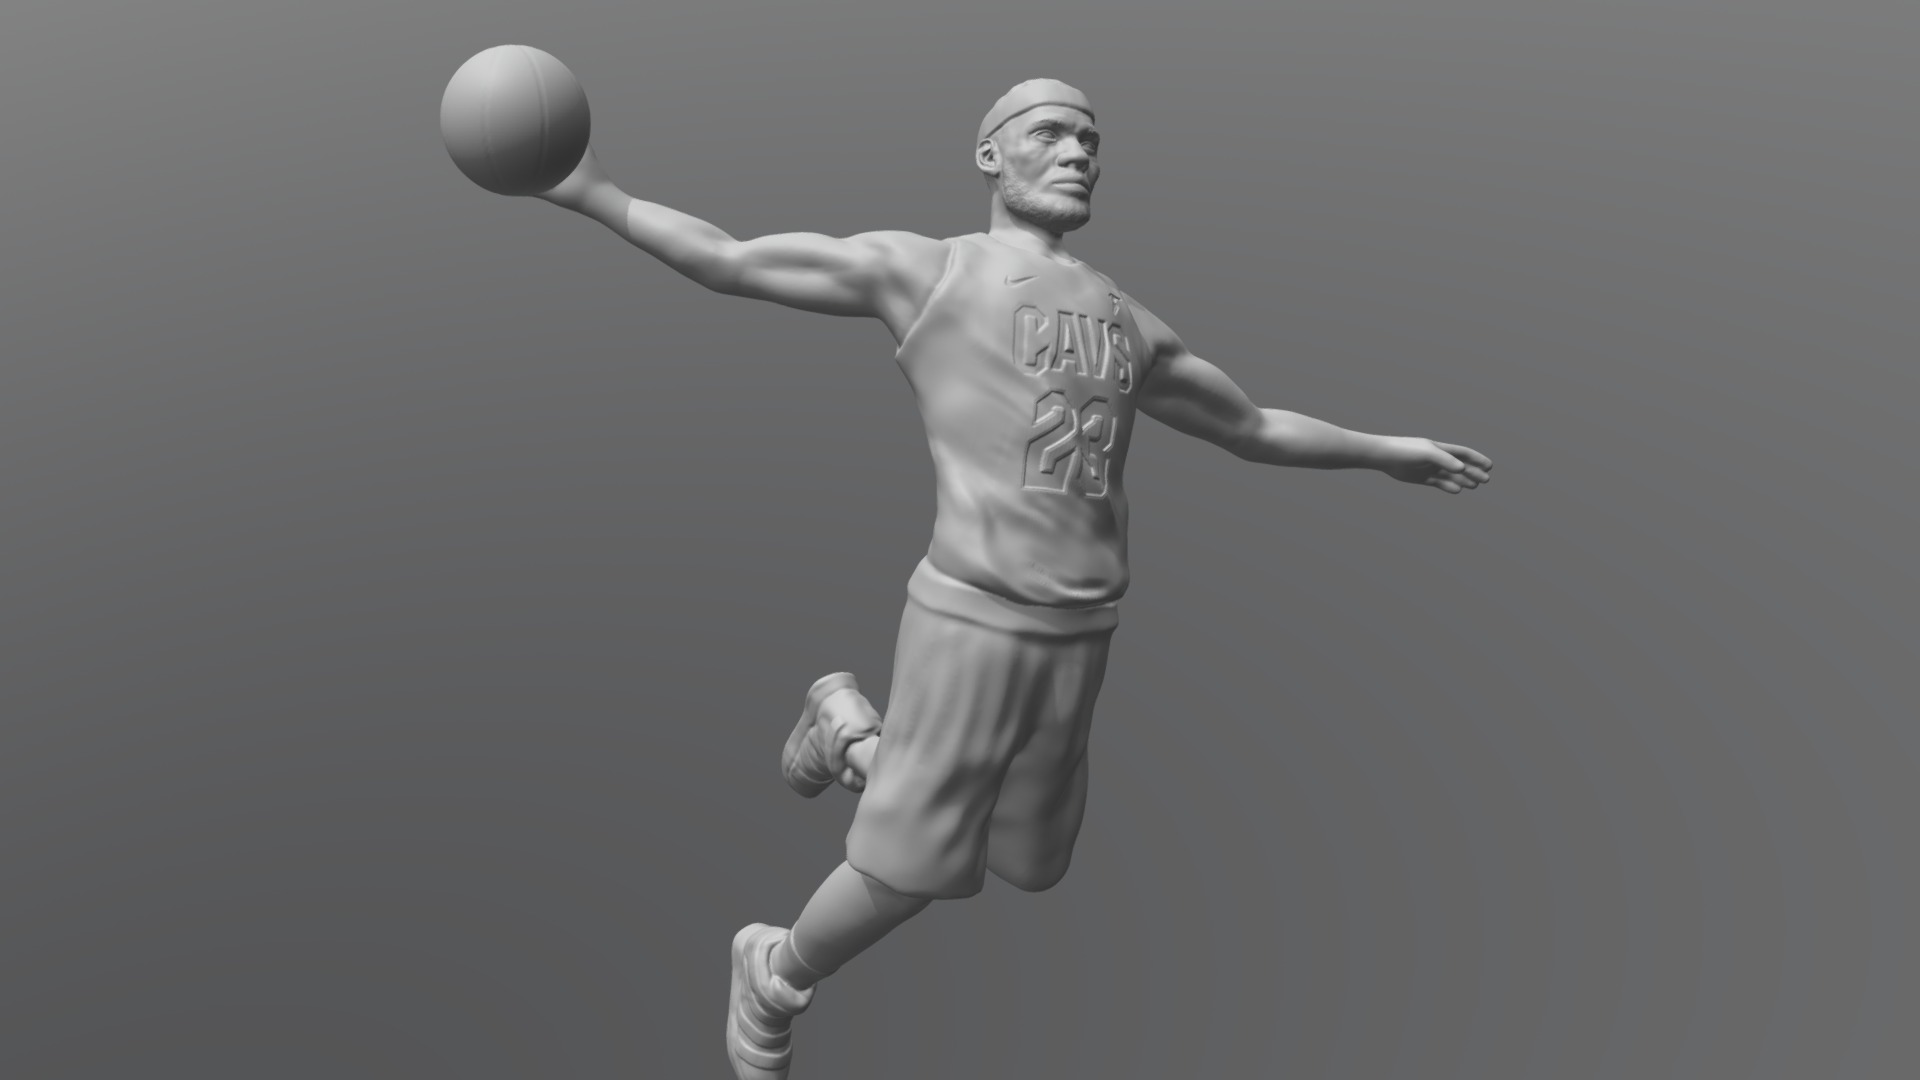 3D model Lebron James for 3D printing - This is a 3D model of the Lebron James for 3D printing. The 3D model is about a person in a basketball uniform jumping to catch a ball.